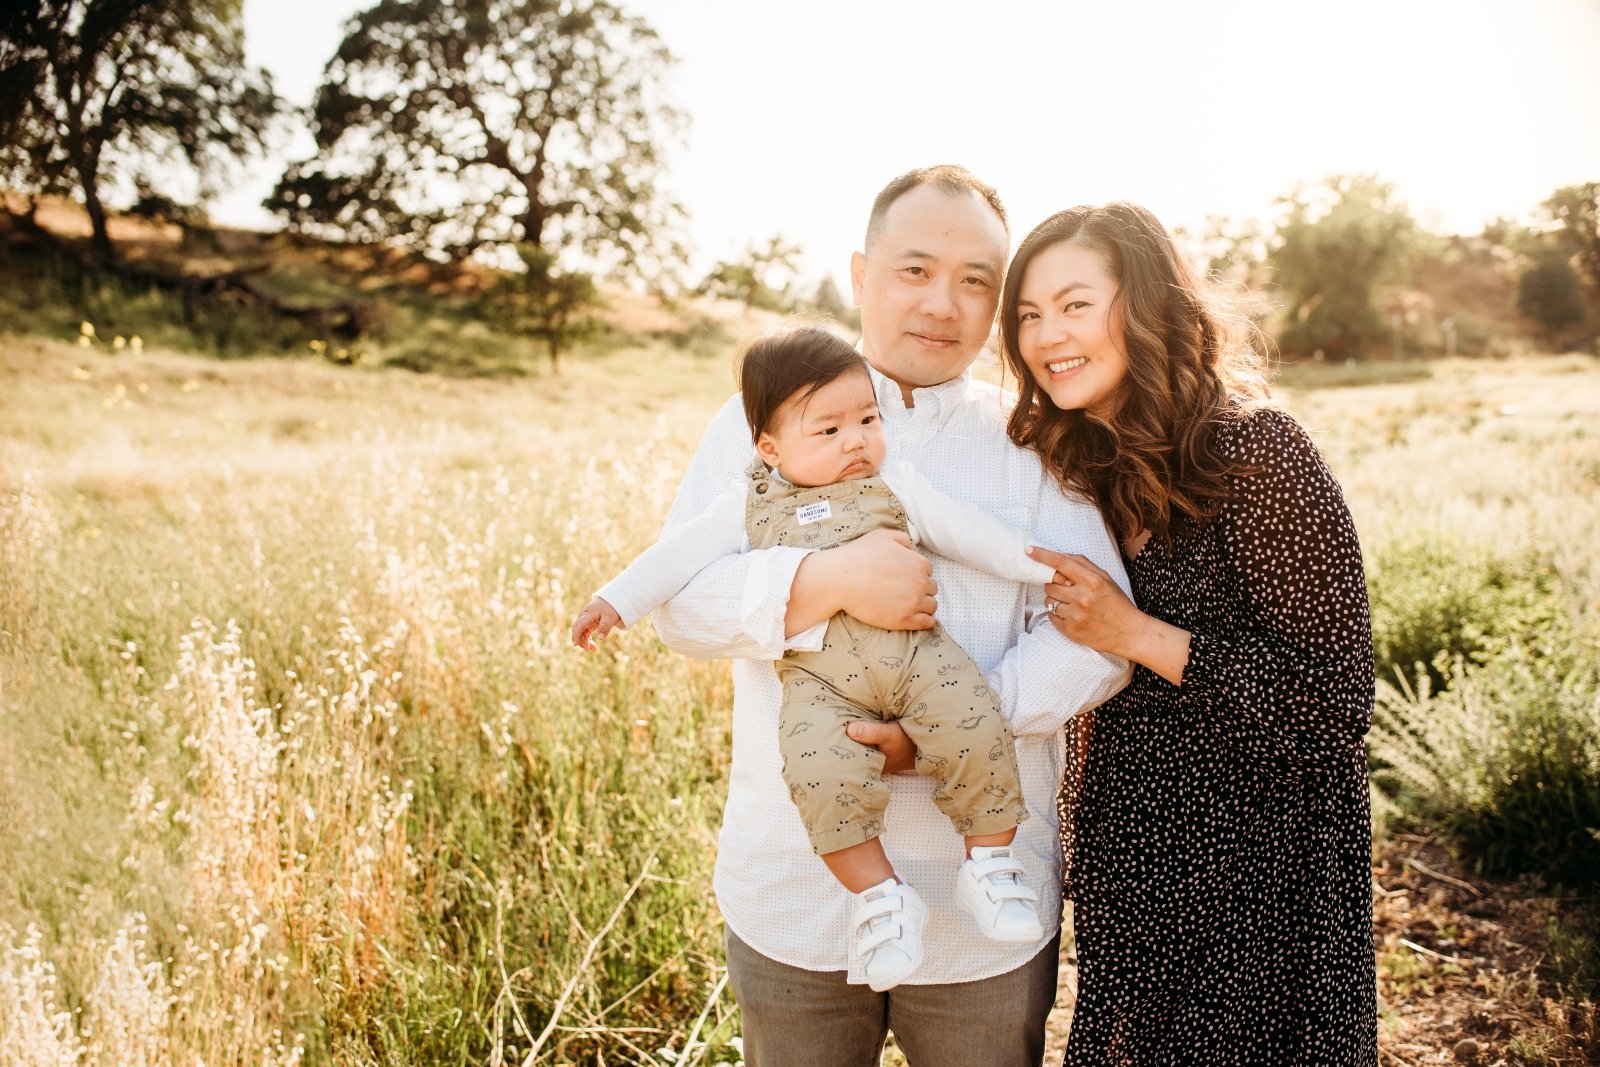 EAST BAY AREA FAMILY PHOTOGRAPHY SHELL RIDGE OPEN SPACE BABY LIFESTYLE PHOTOSHOOT  1.jpg